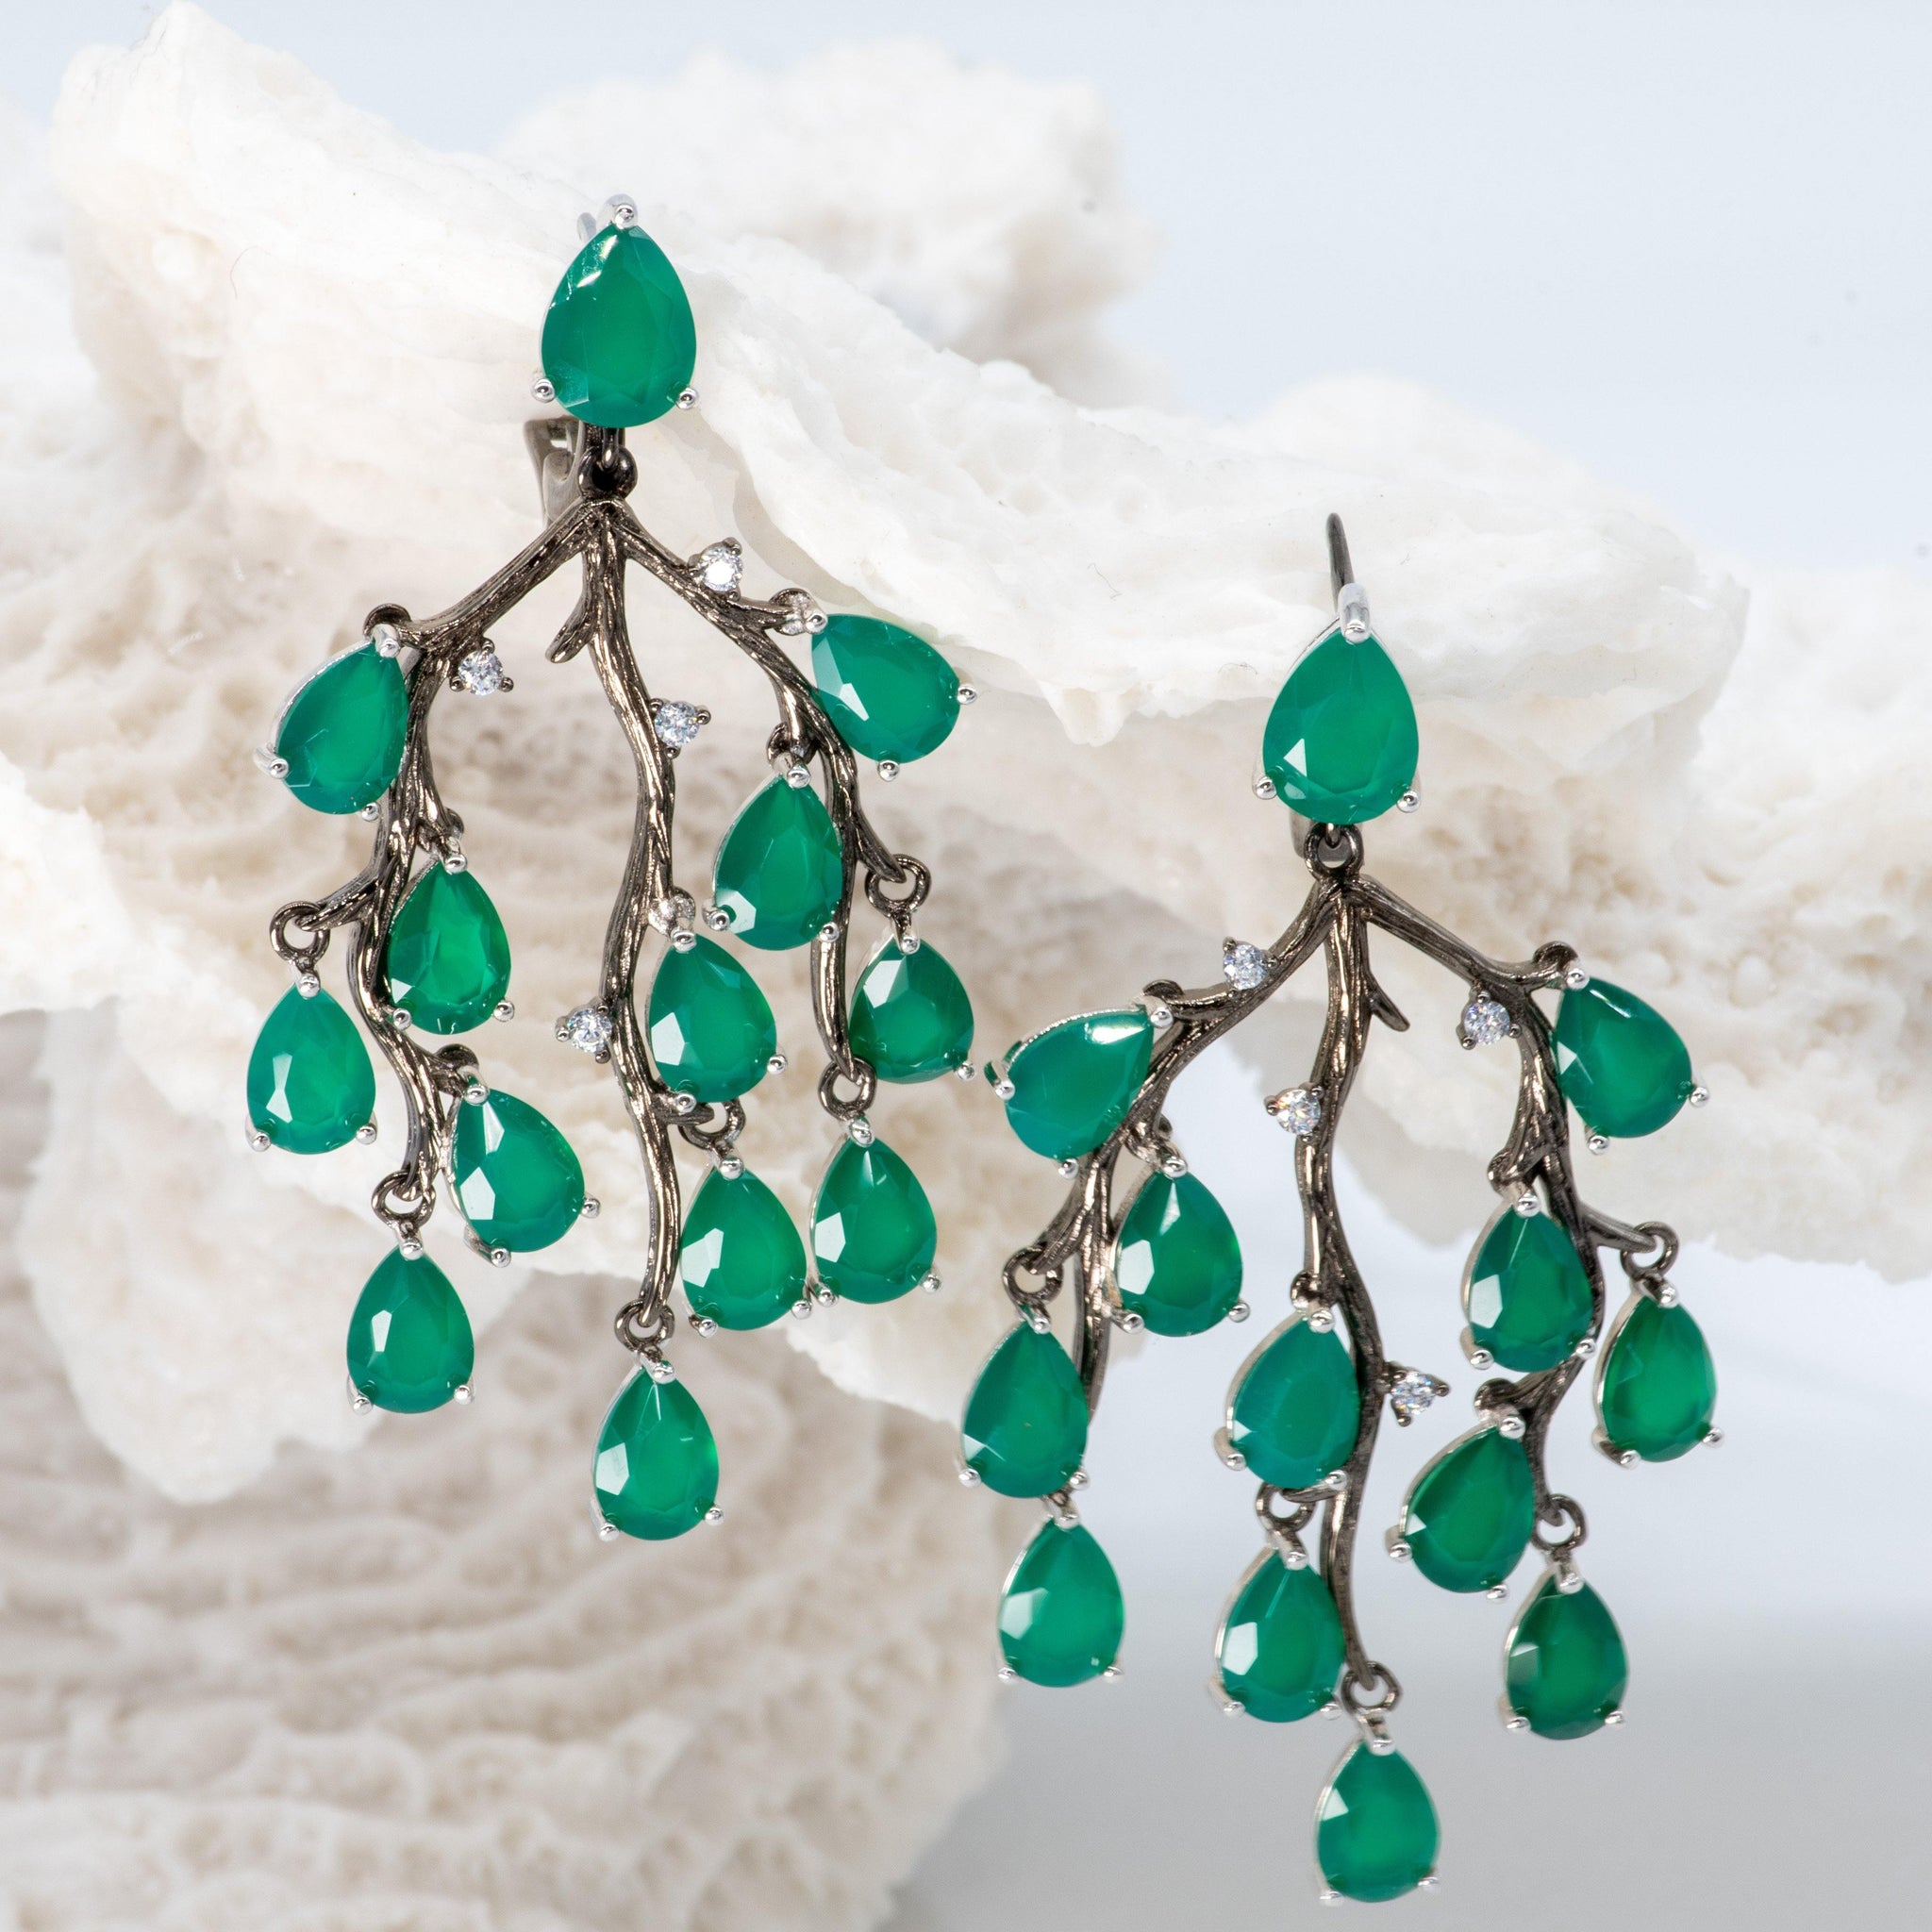 Buy Online Elegant and Stylish Cascade Green Agate Drop Earrings  | Buy Online Premium Quality Silver Cascade Green Agate Drop Earrings for special occasions - Heron and Swan 